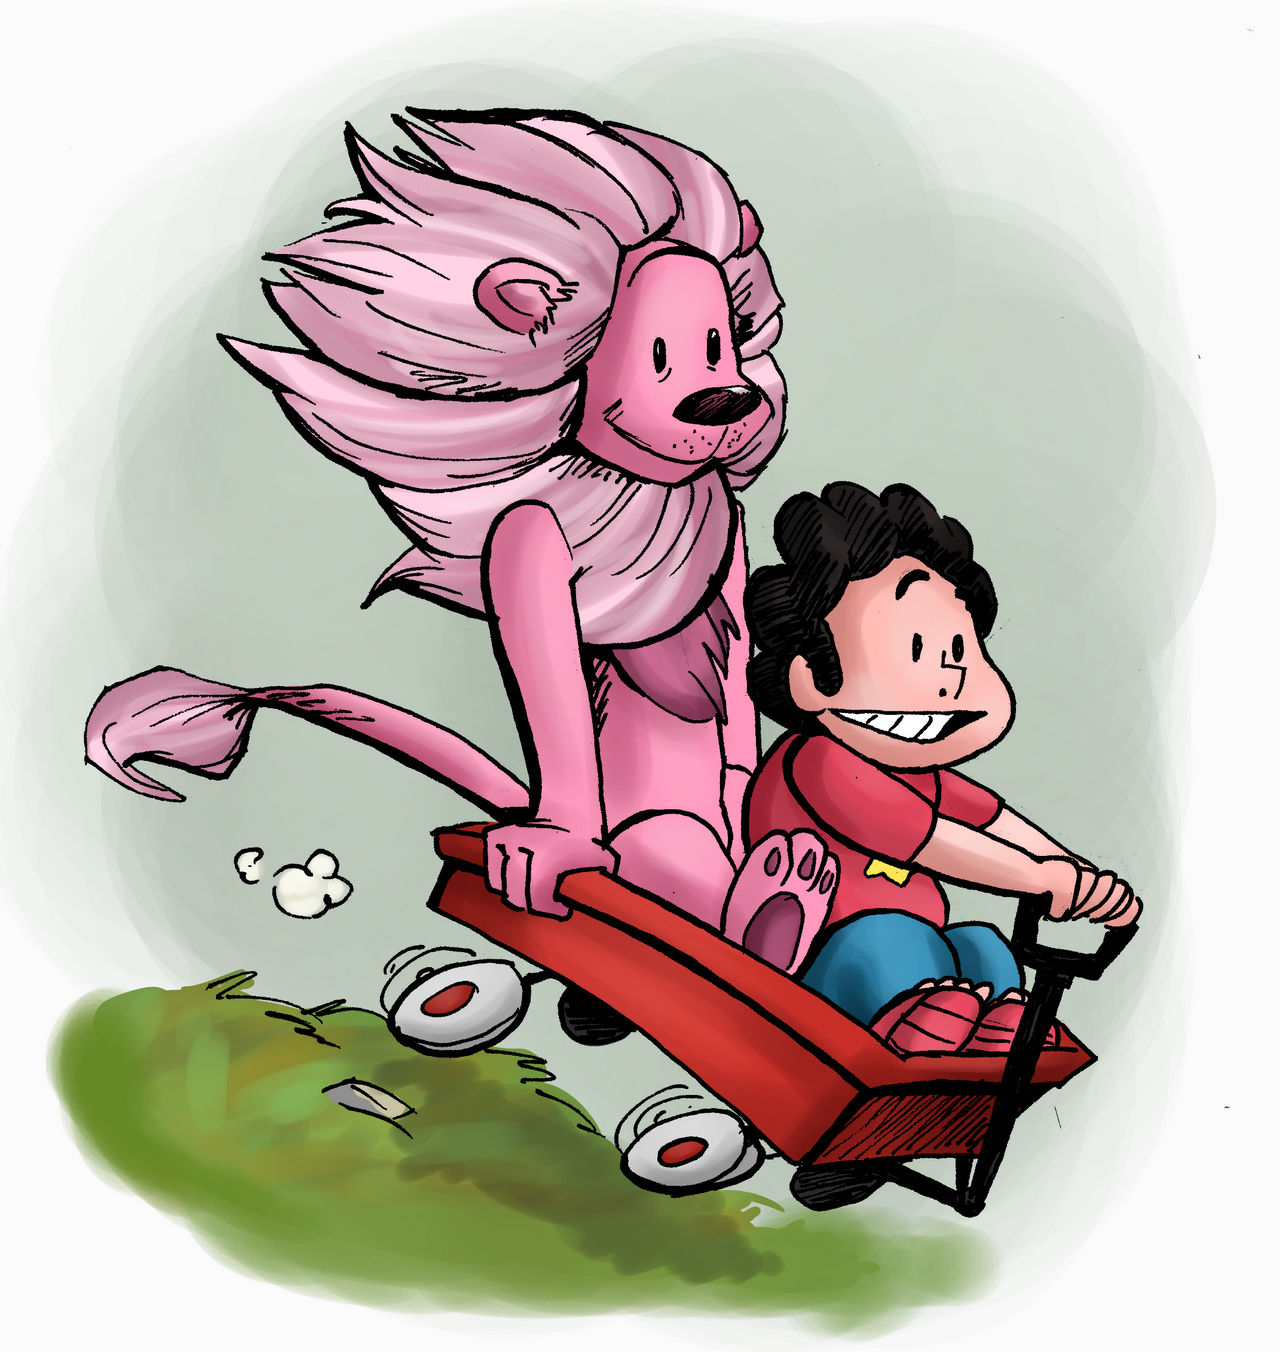 Steven and Lion